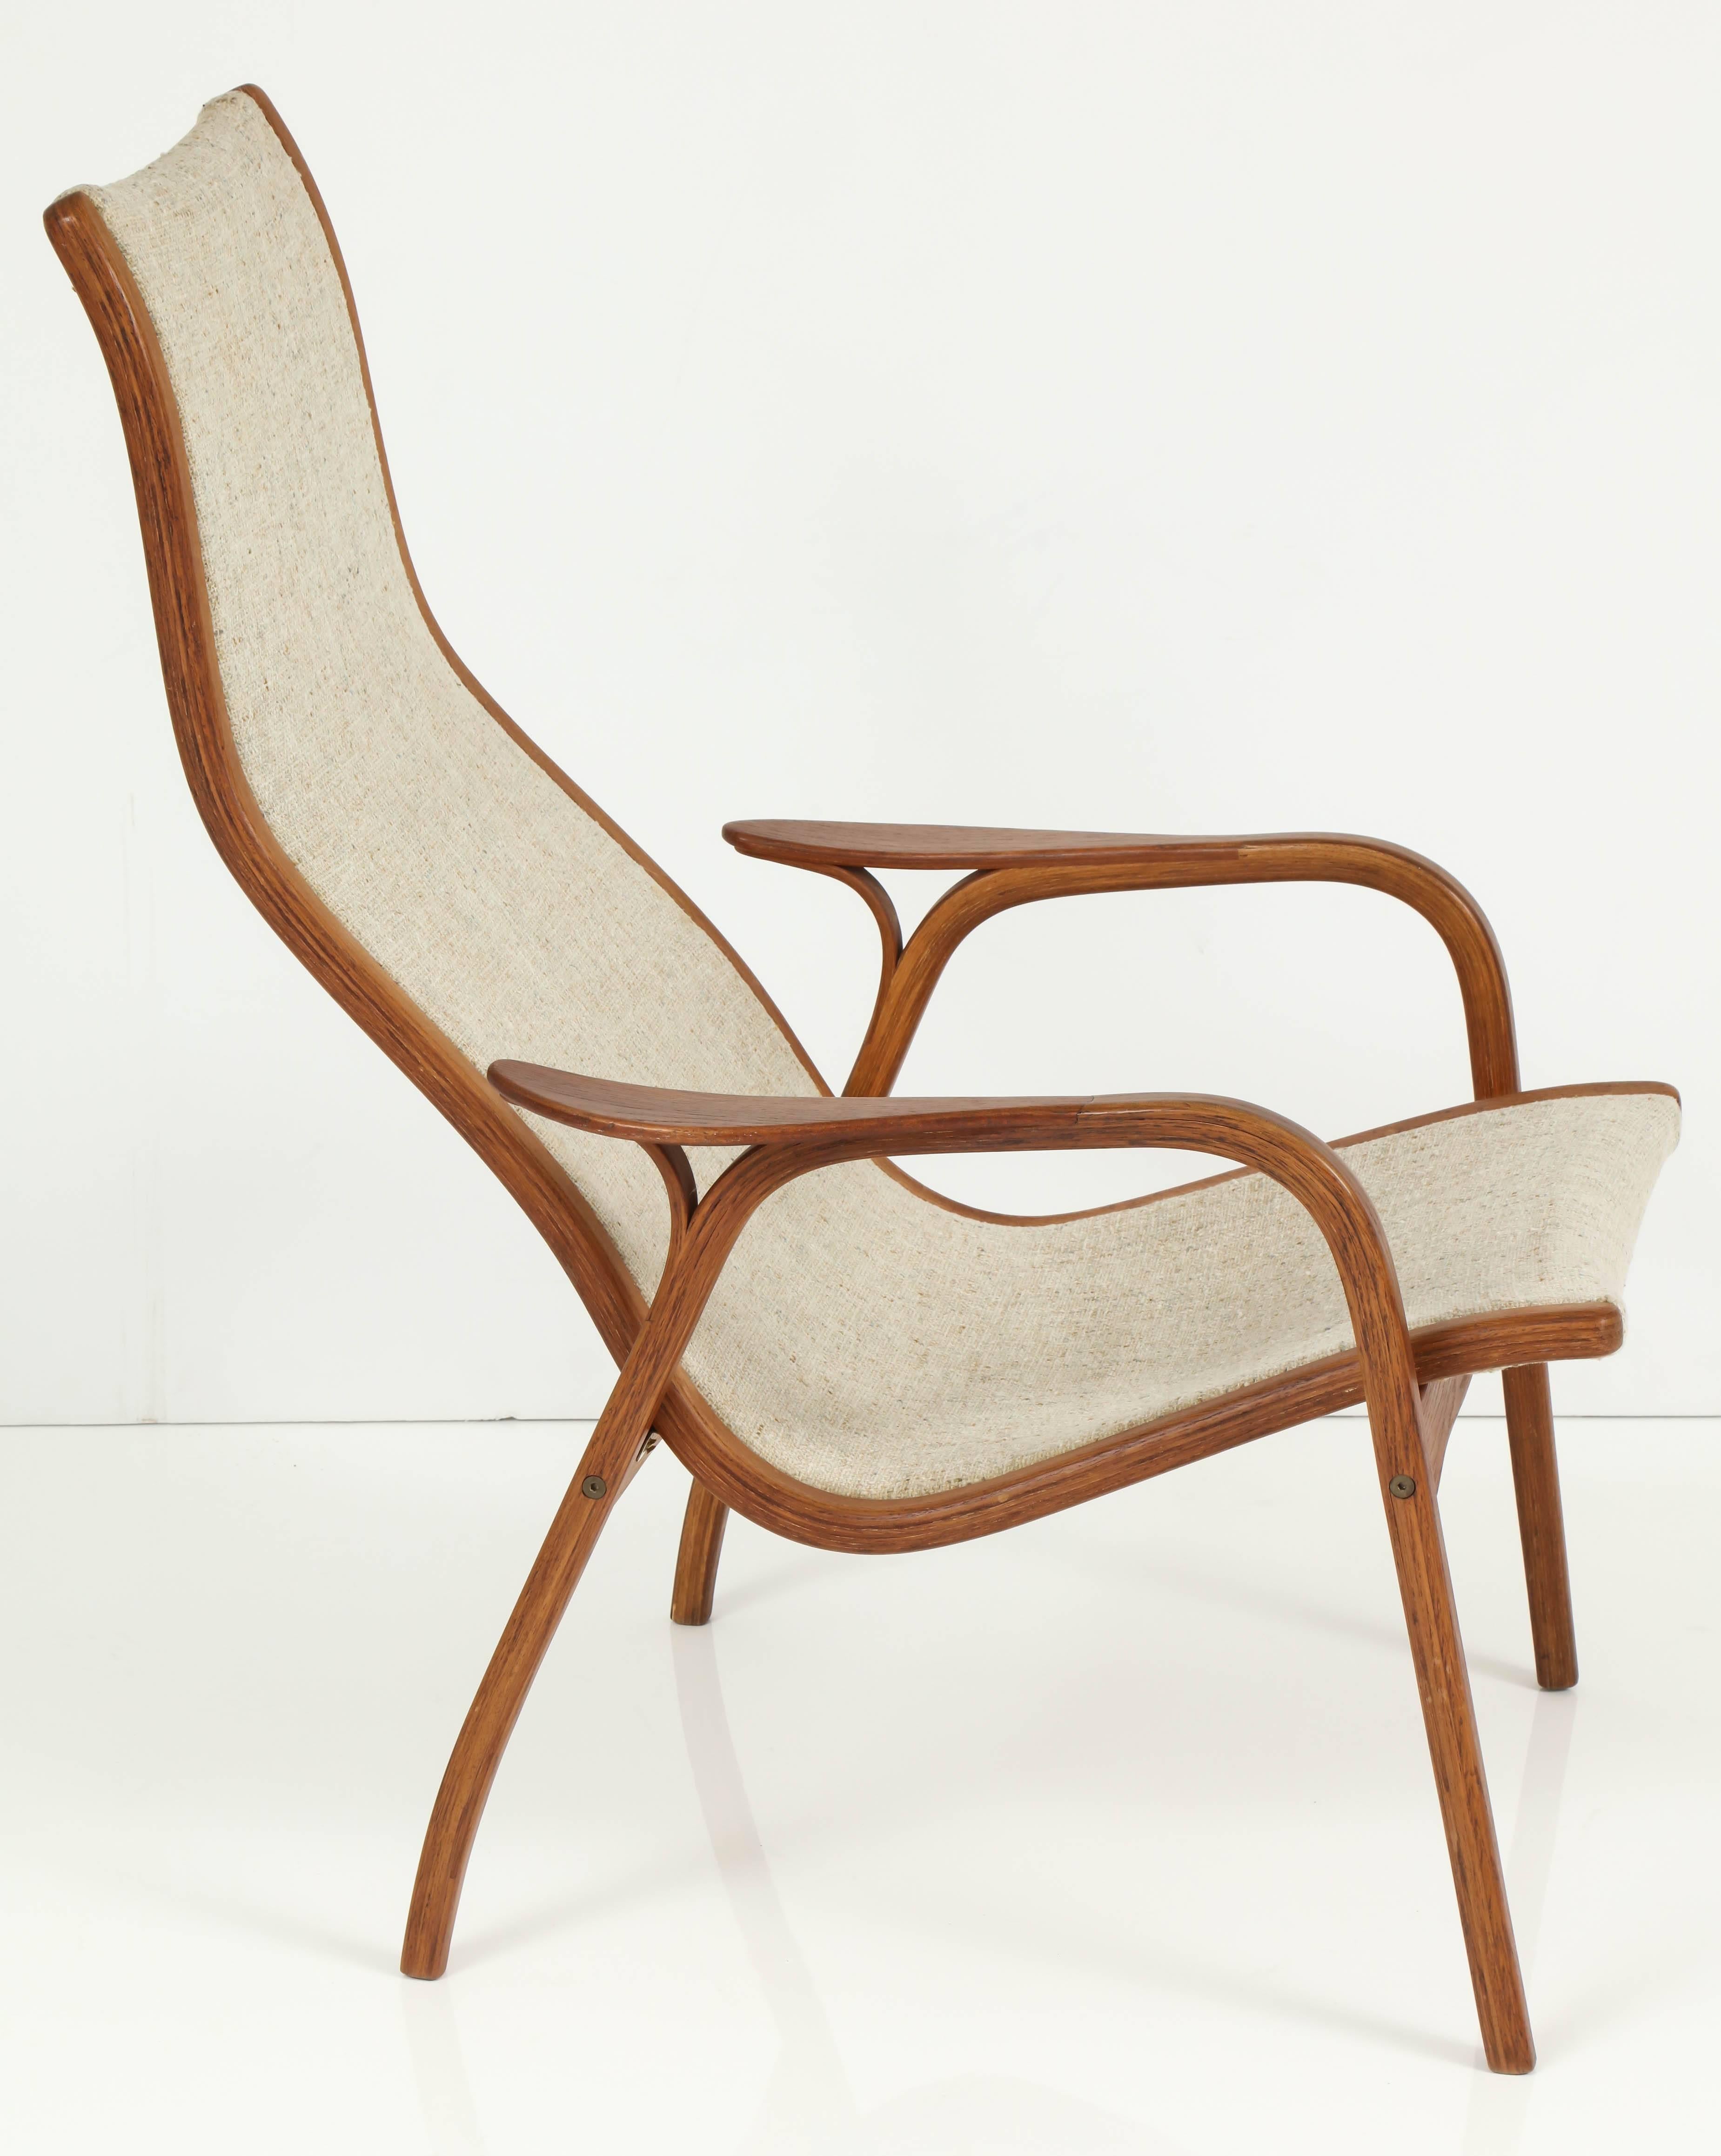 A very comfortable, mid-century modern lounge chair by Yngve Ekström, Sweden, circa 1960. Chair frame is made of teakwood and upholstery fabric is nubby cream wool.